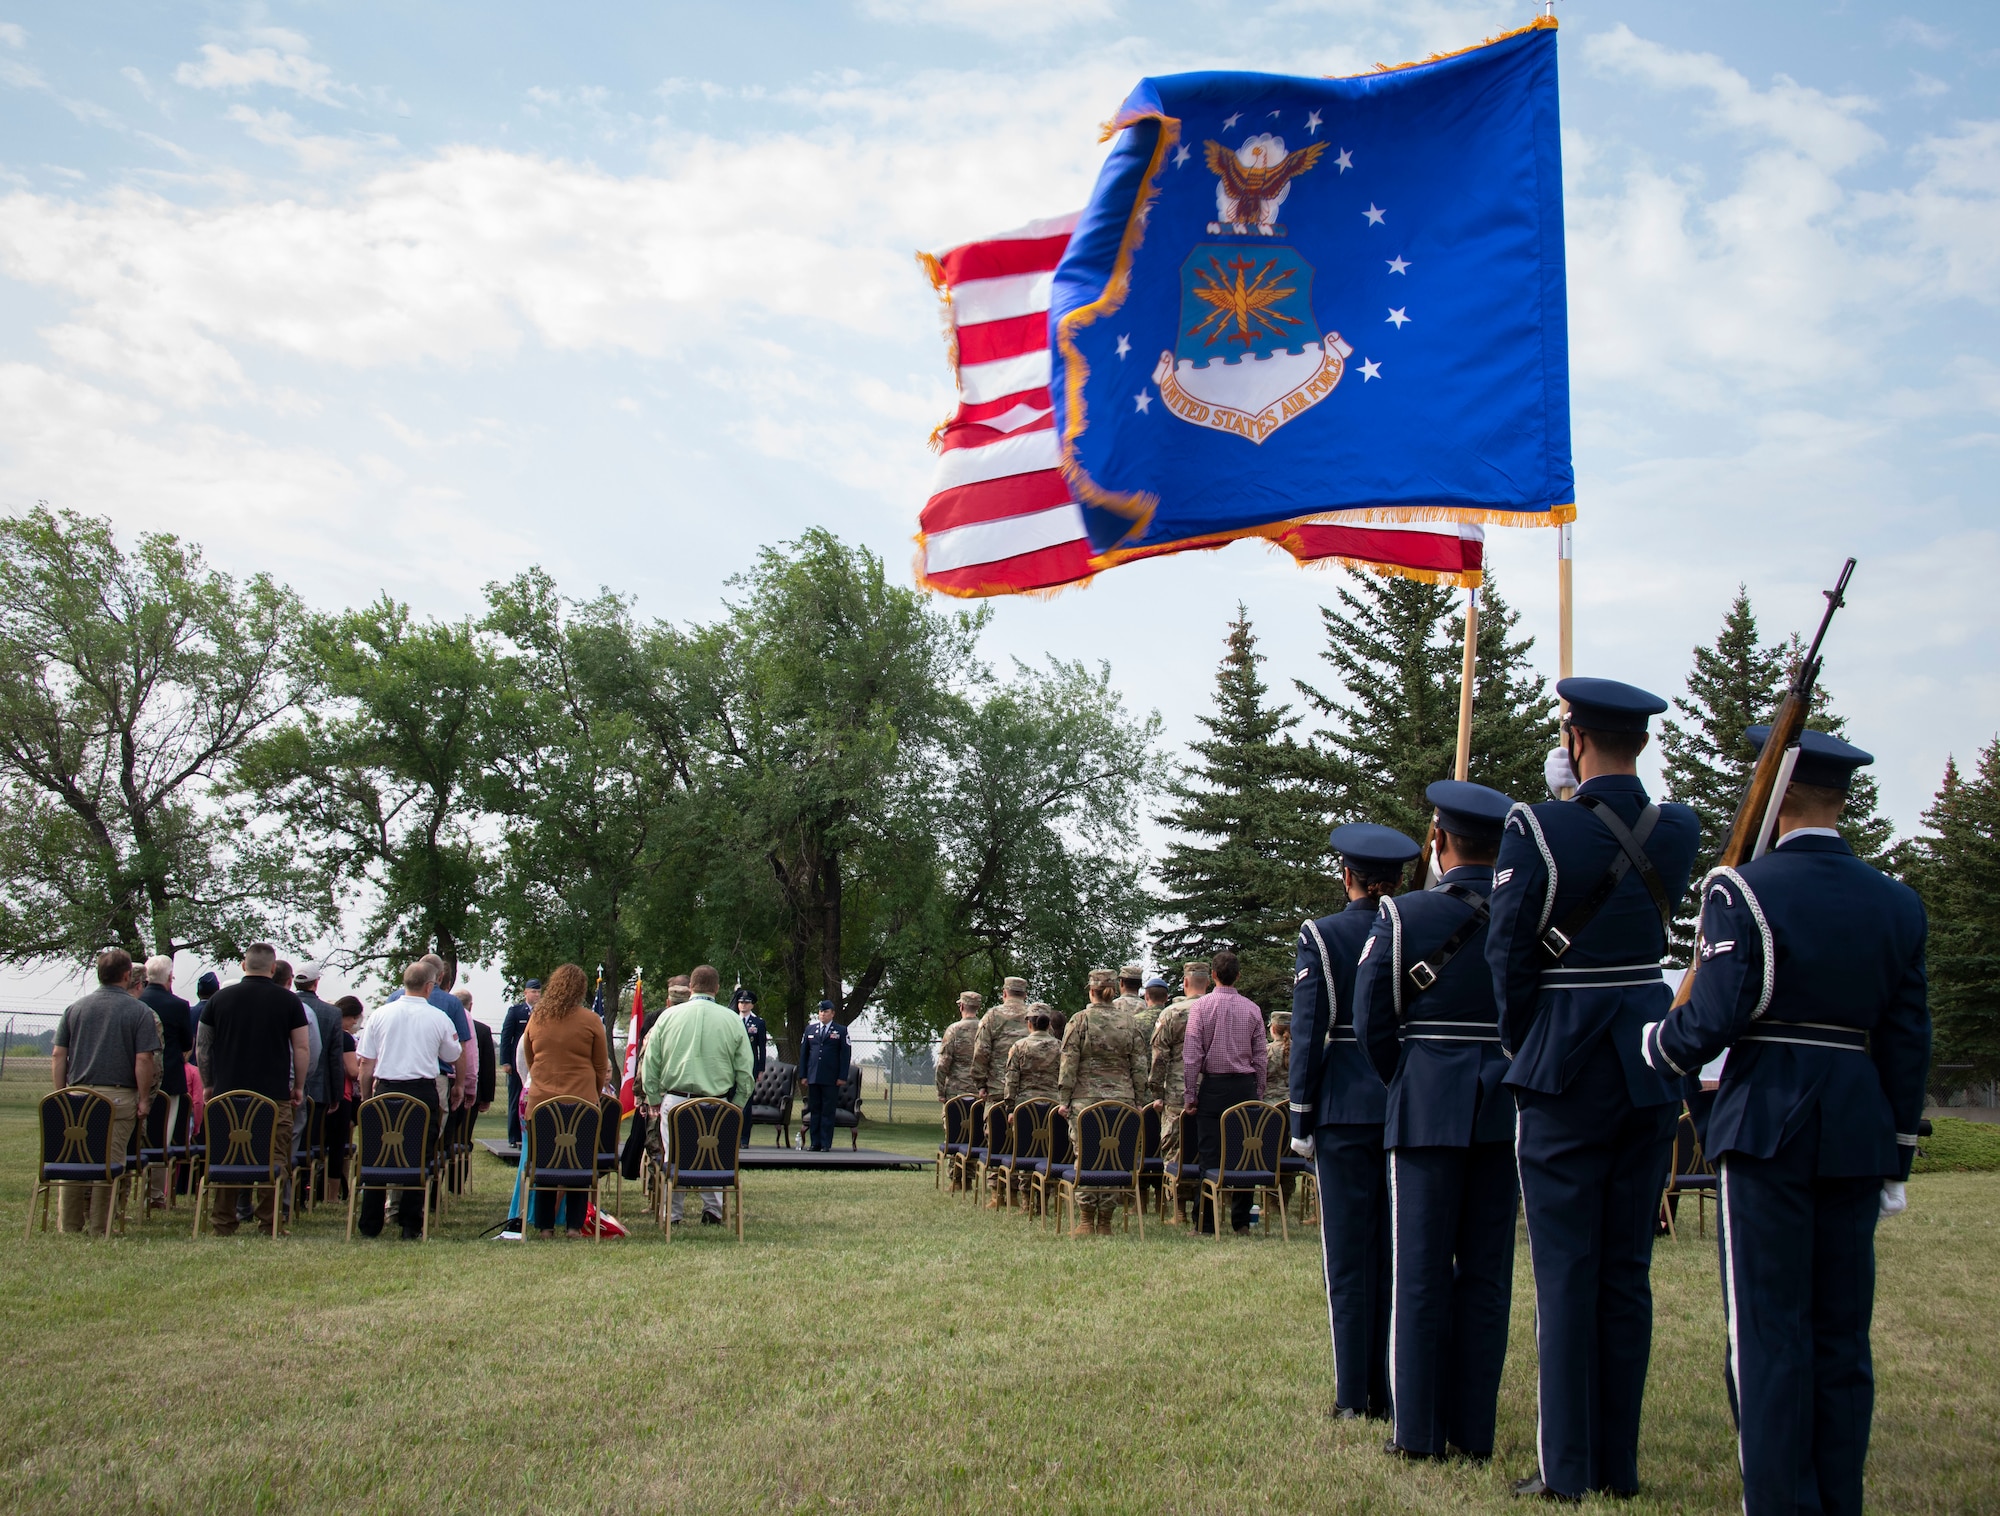 The 319th Reconnaissance Wing honor guard prepares to march during the renaming ceremony at Cavalier Space Force Station, N.D., July 30, 2021.